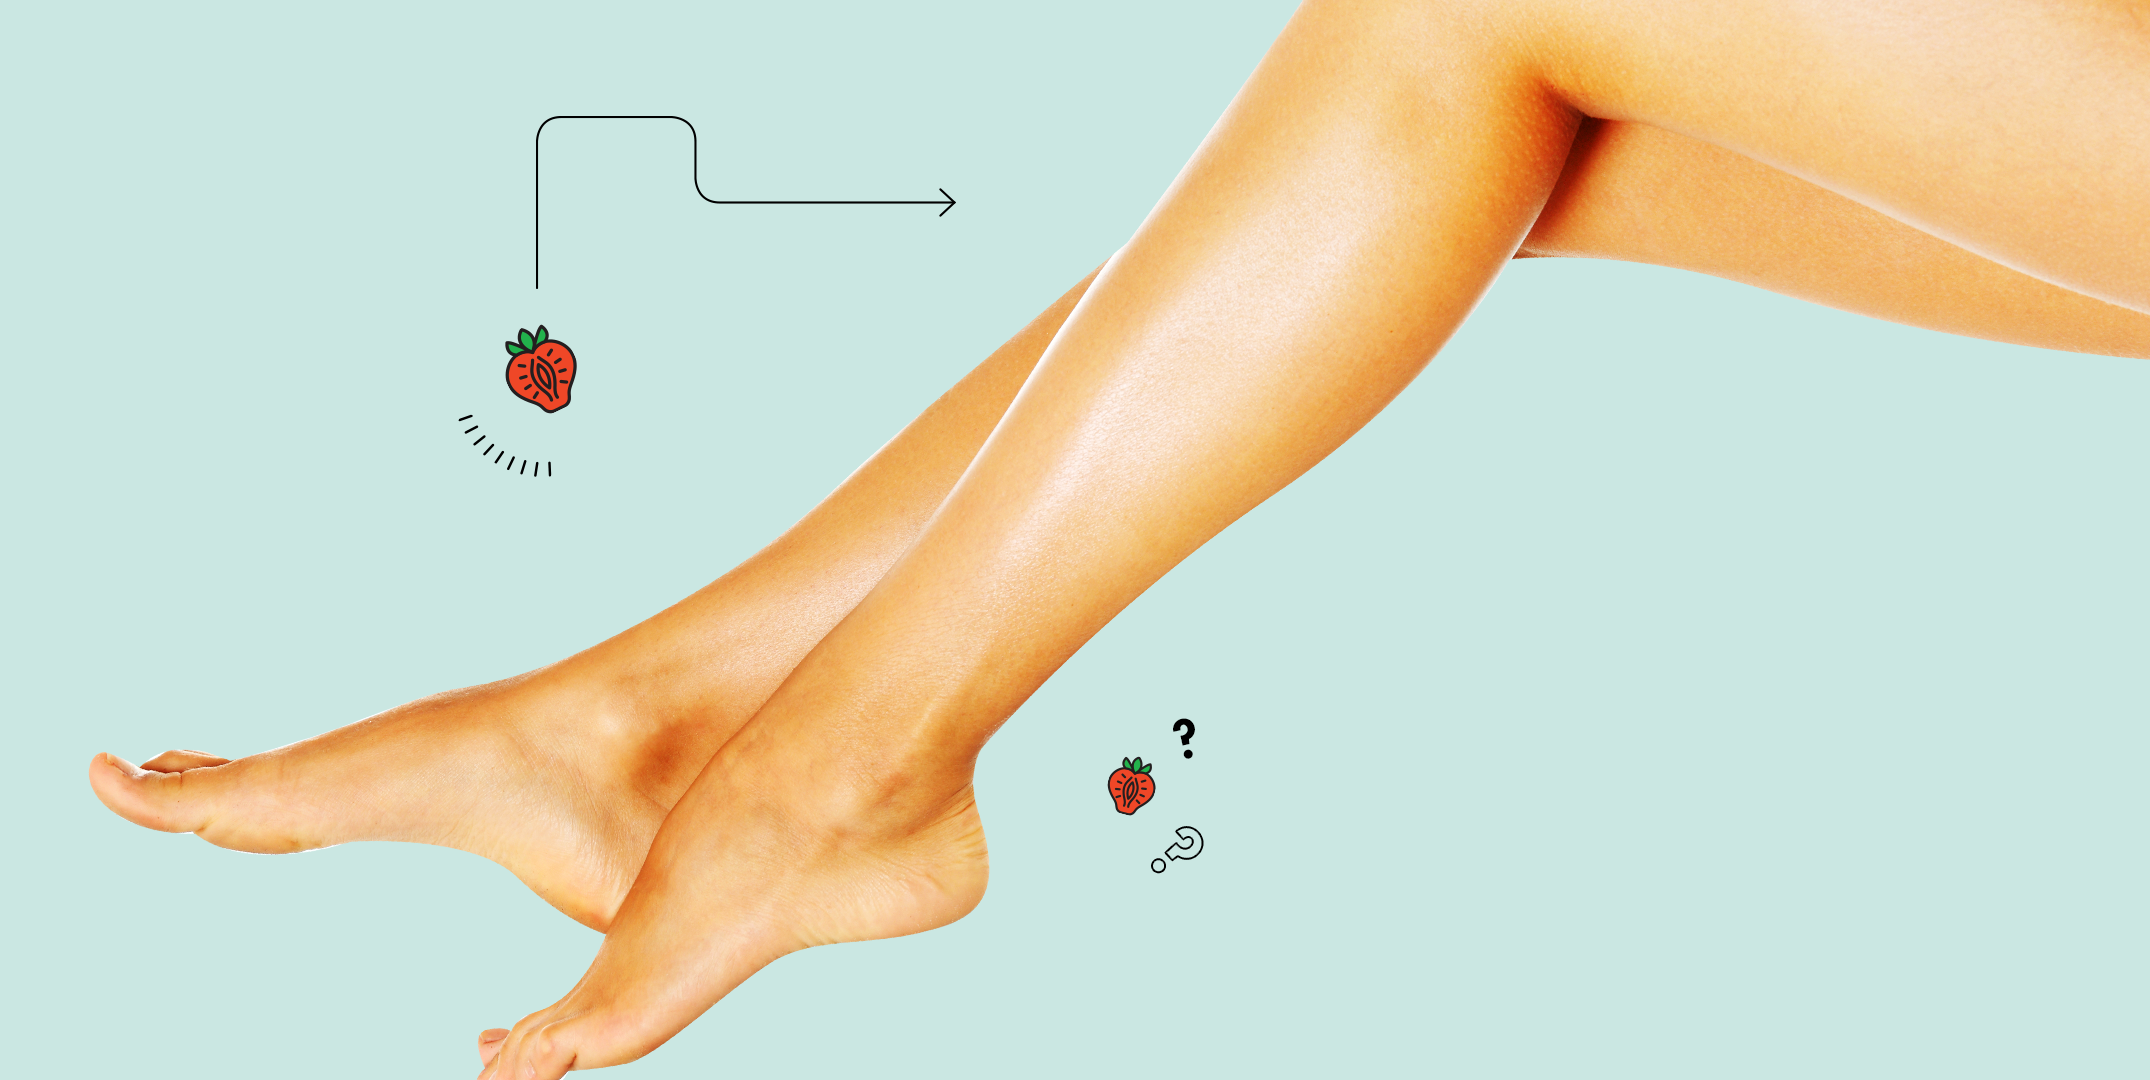 Legs: How Get Rid of the Red Dots on Your Skin